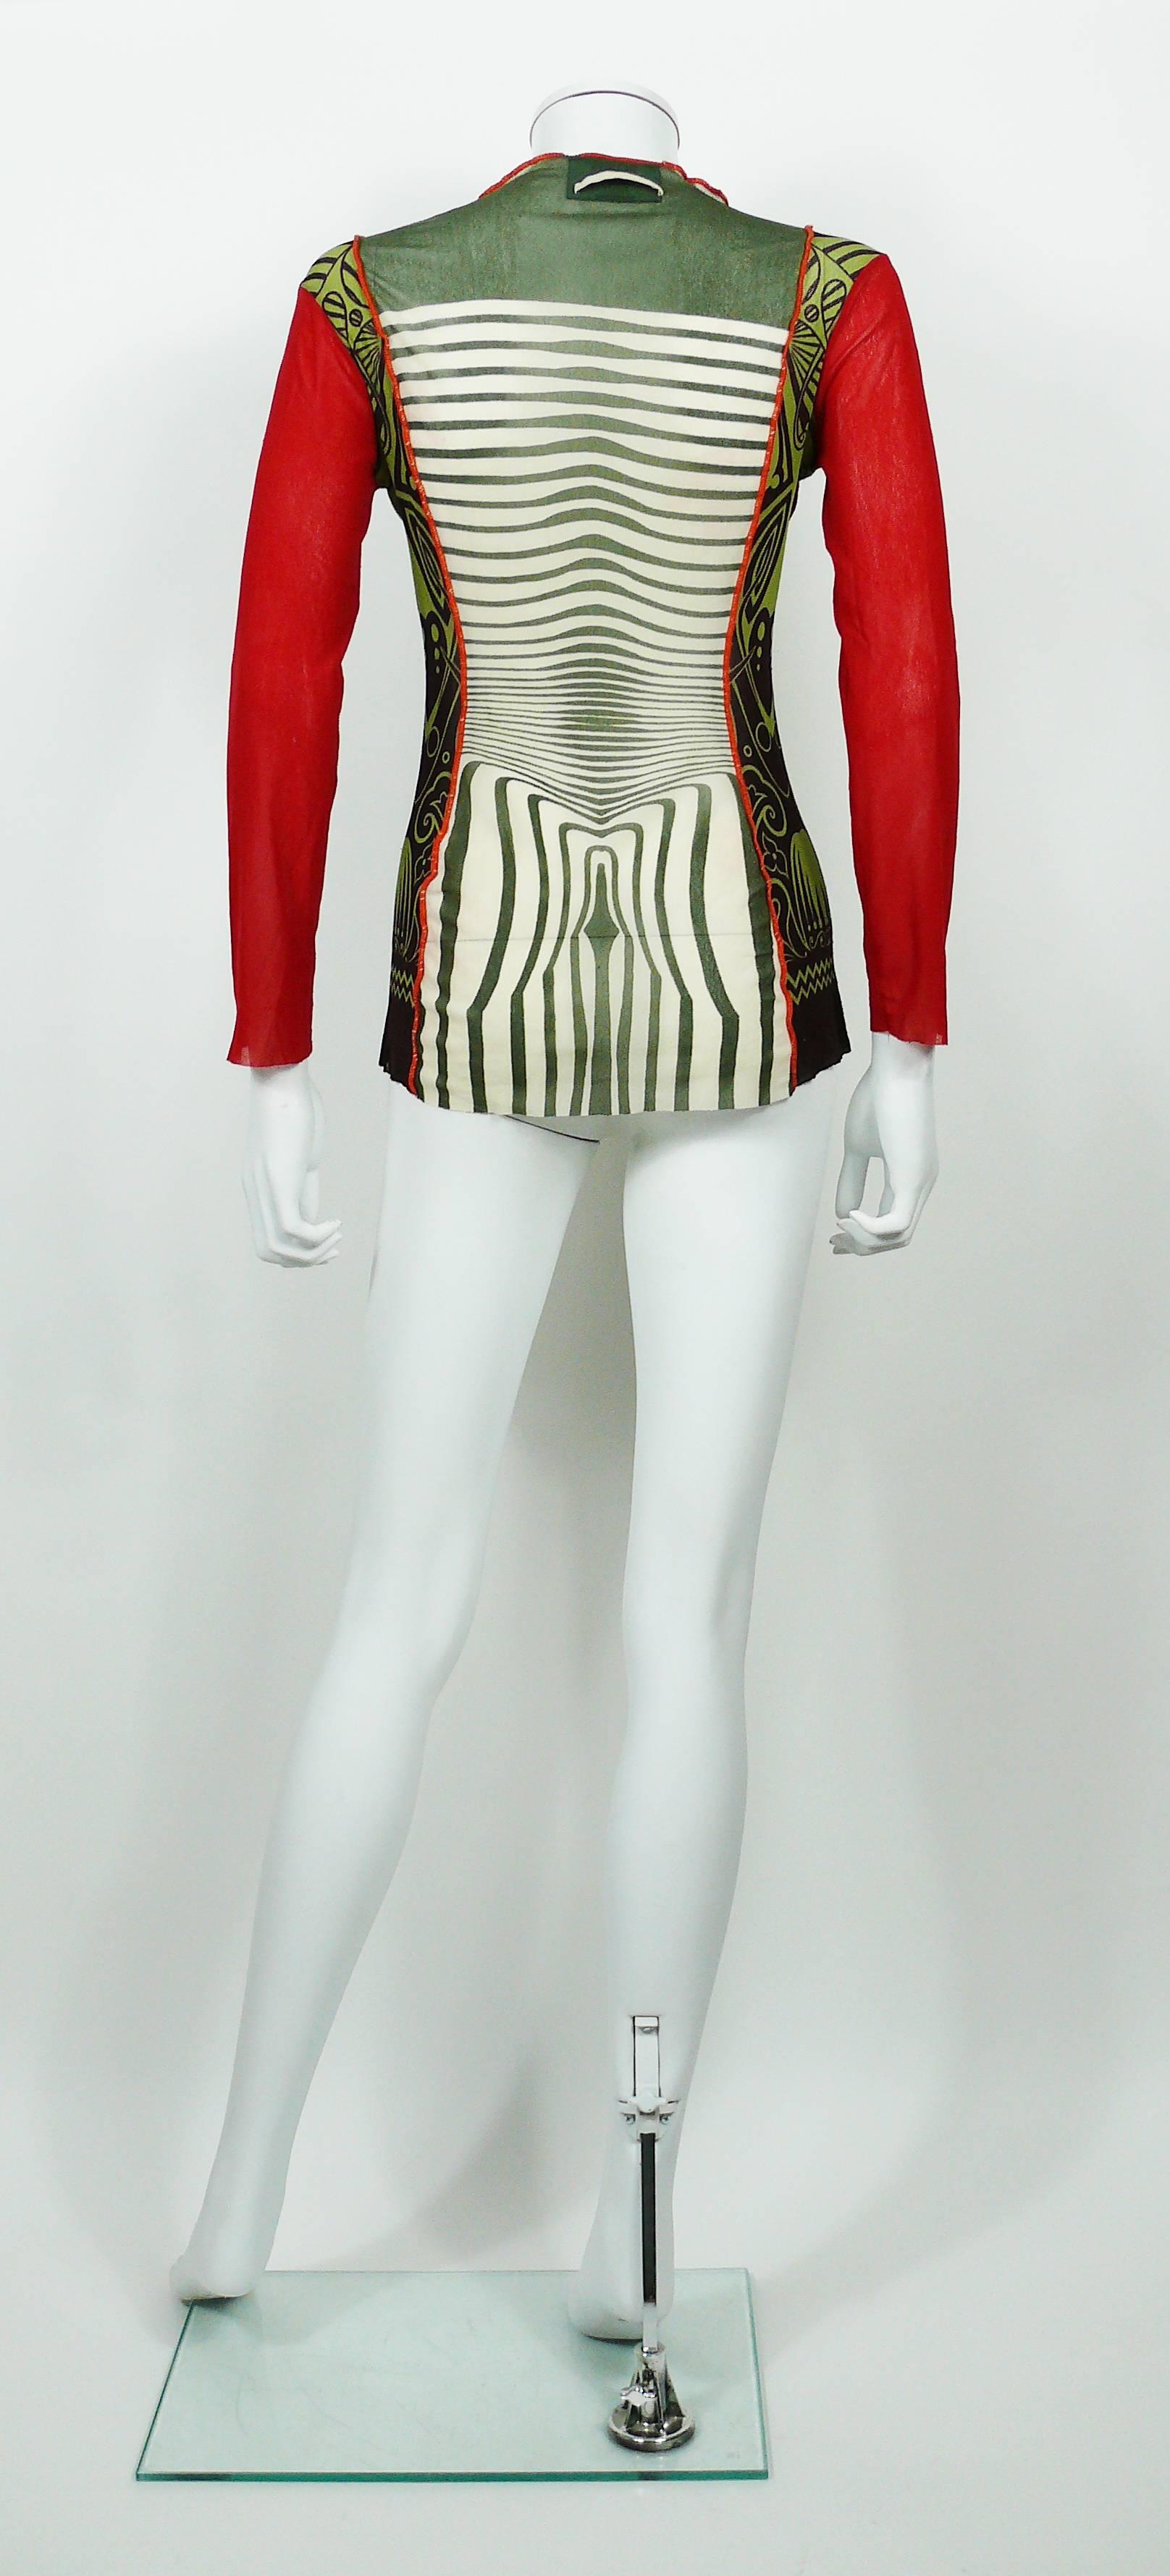 Women's Jean Paul Gaultier Vintage 1996 Cyberbaba Body Map Optical Illusion Top Size L